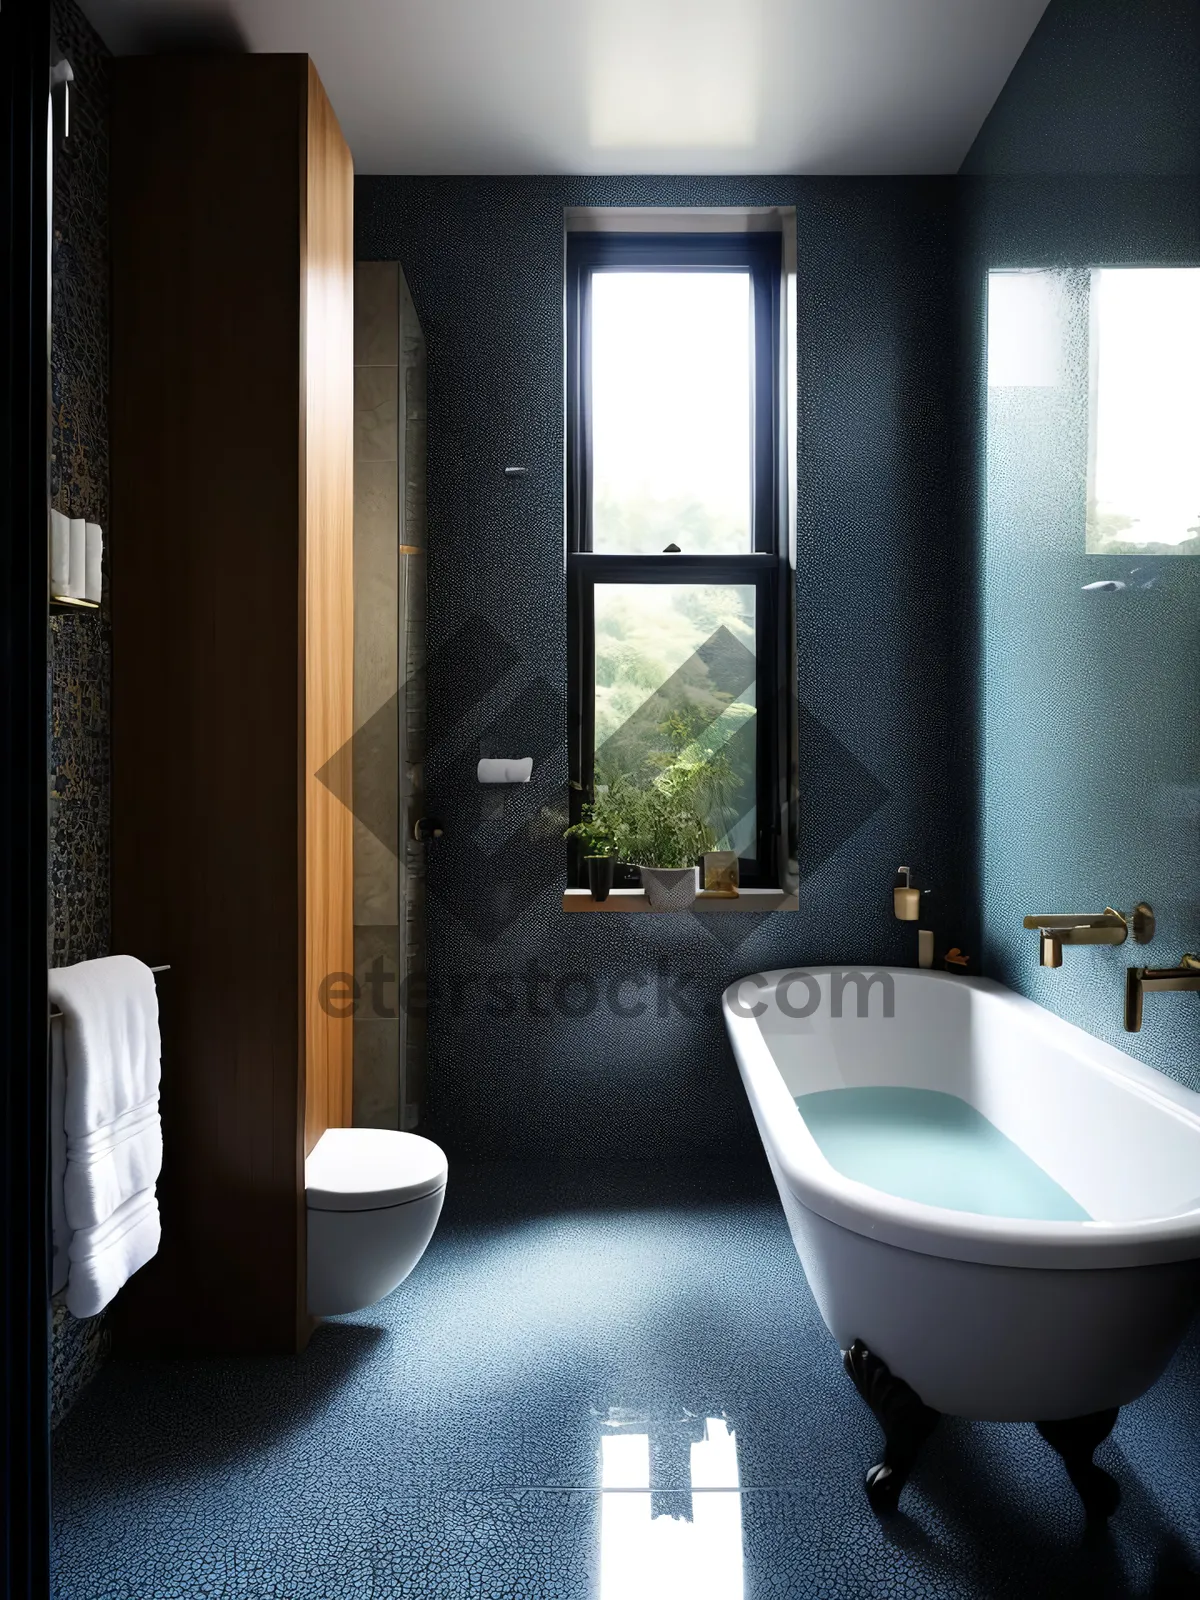 Picture of Modern luxury bathroom with clean design and stylish fixtures